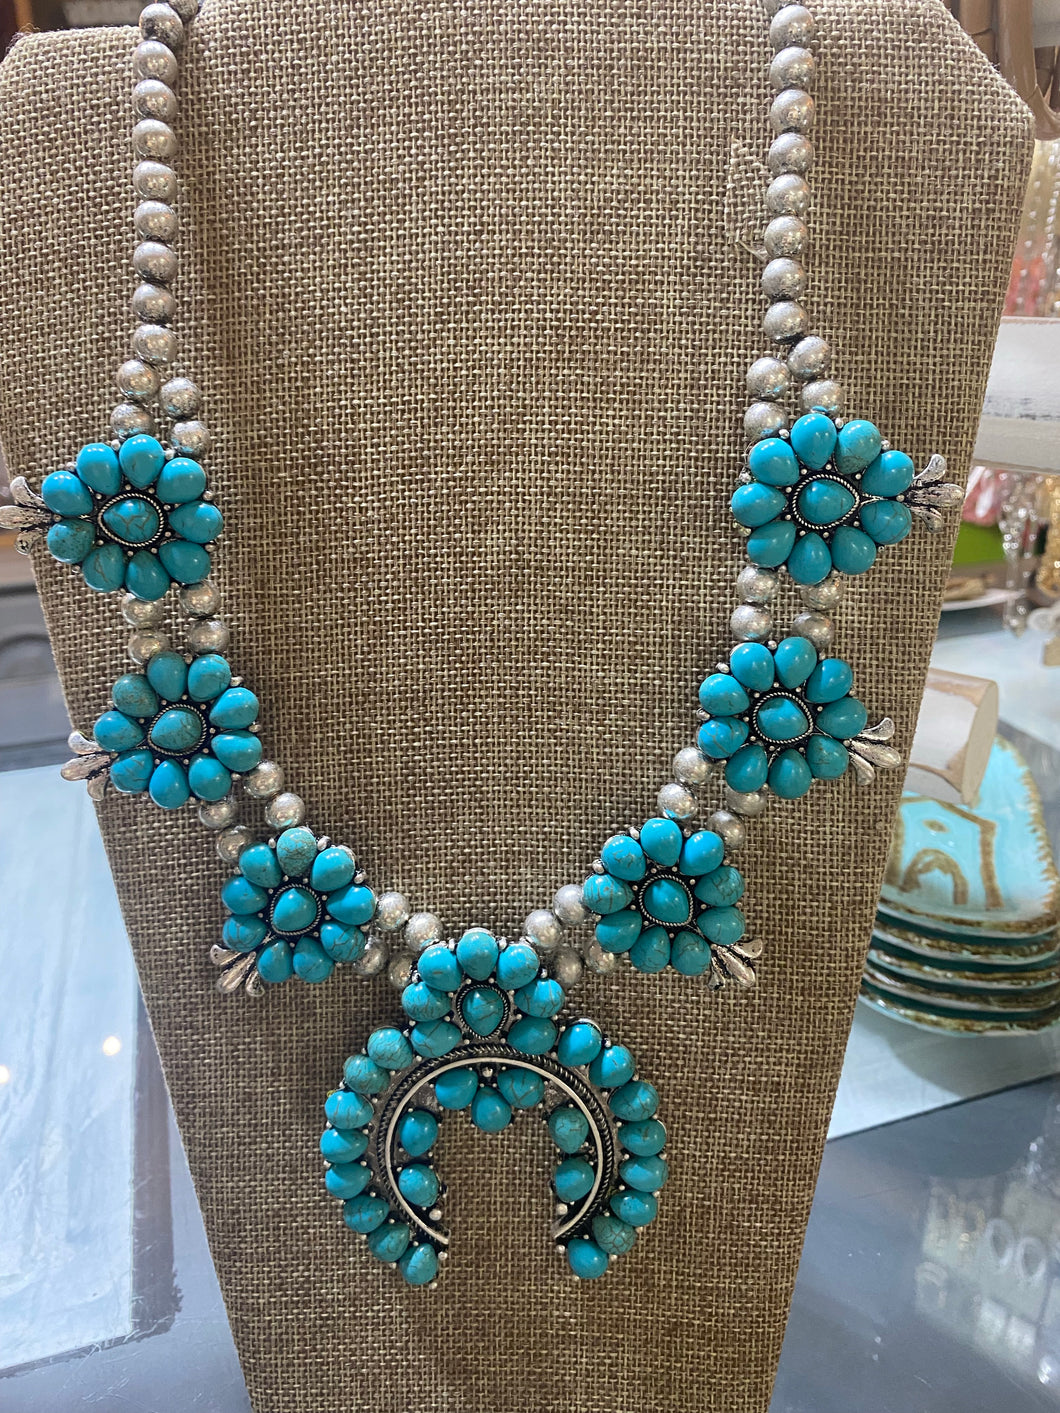 How You Can Authenticate a Navajo Squash Blossom Necklace